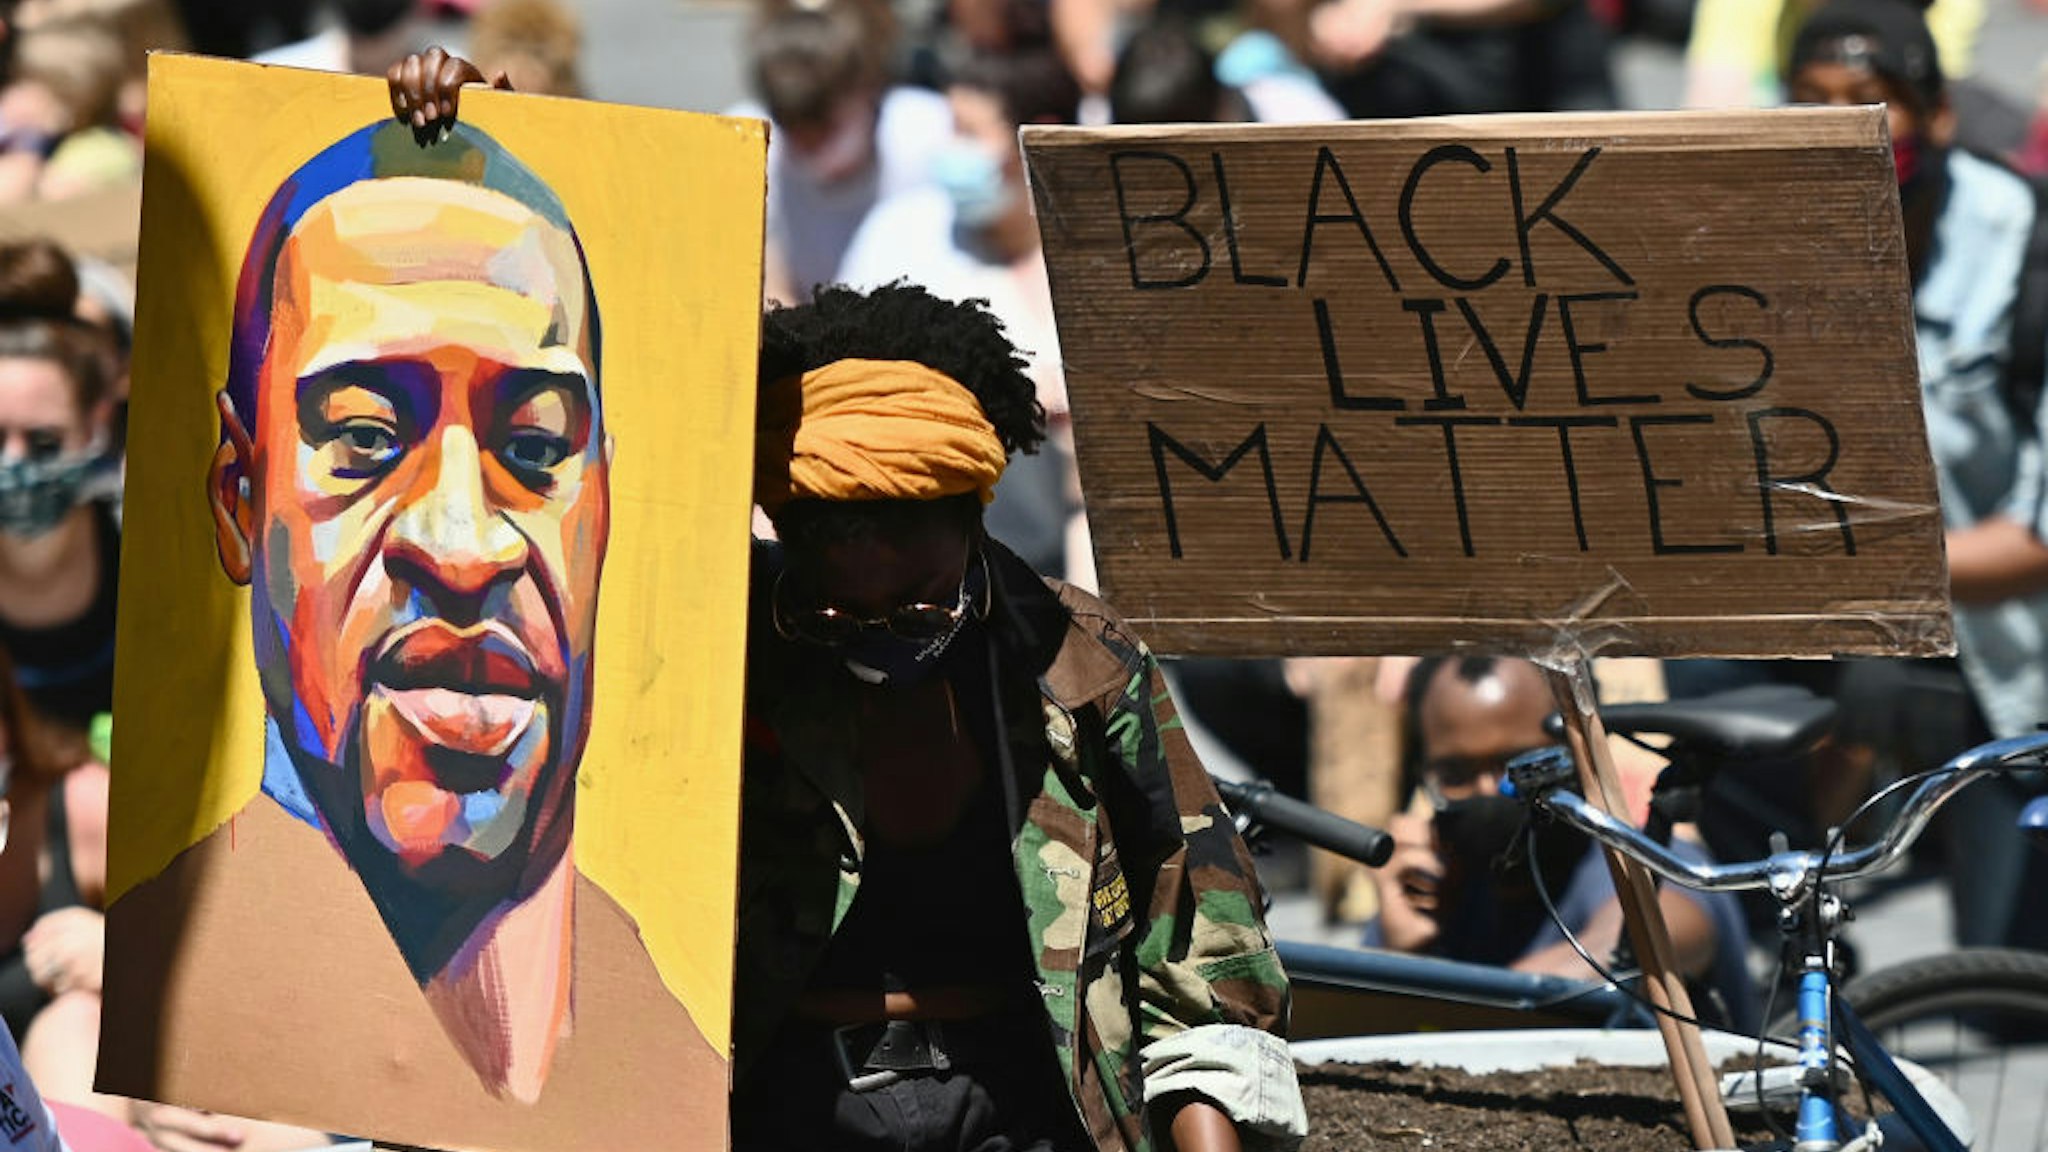 TOPSHOT - Protesters hold up signs during a "Black Lives Matter" protest in front of Borough Hall on June 8, 2020 in New York City. - On May 25, 2020, Floyd, a 46-year-old black man suspected of passing a counterfeit $20 bill, died in Minneapolis after Derek Chauvin, a white police officer, pressed his knee to Floyd's neck for almost nine minutes. (Photo by Angela Weiss / AFP) (Photo by ANGELA WEISS/AFP via Getty Images)